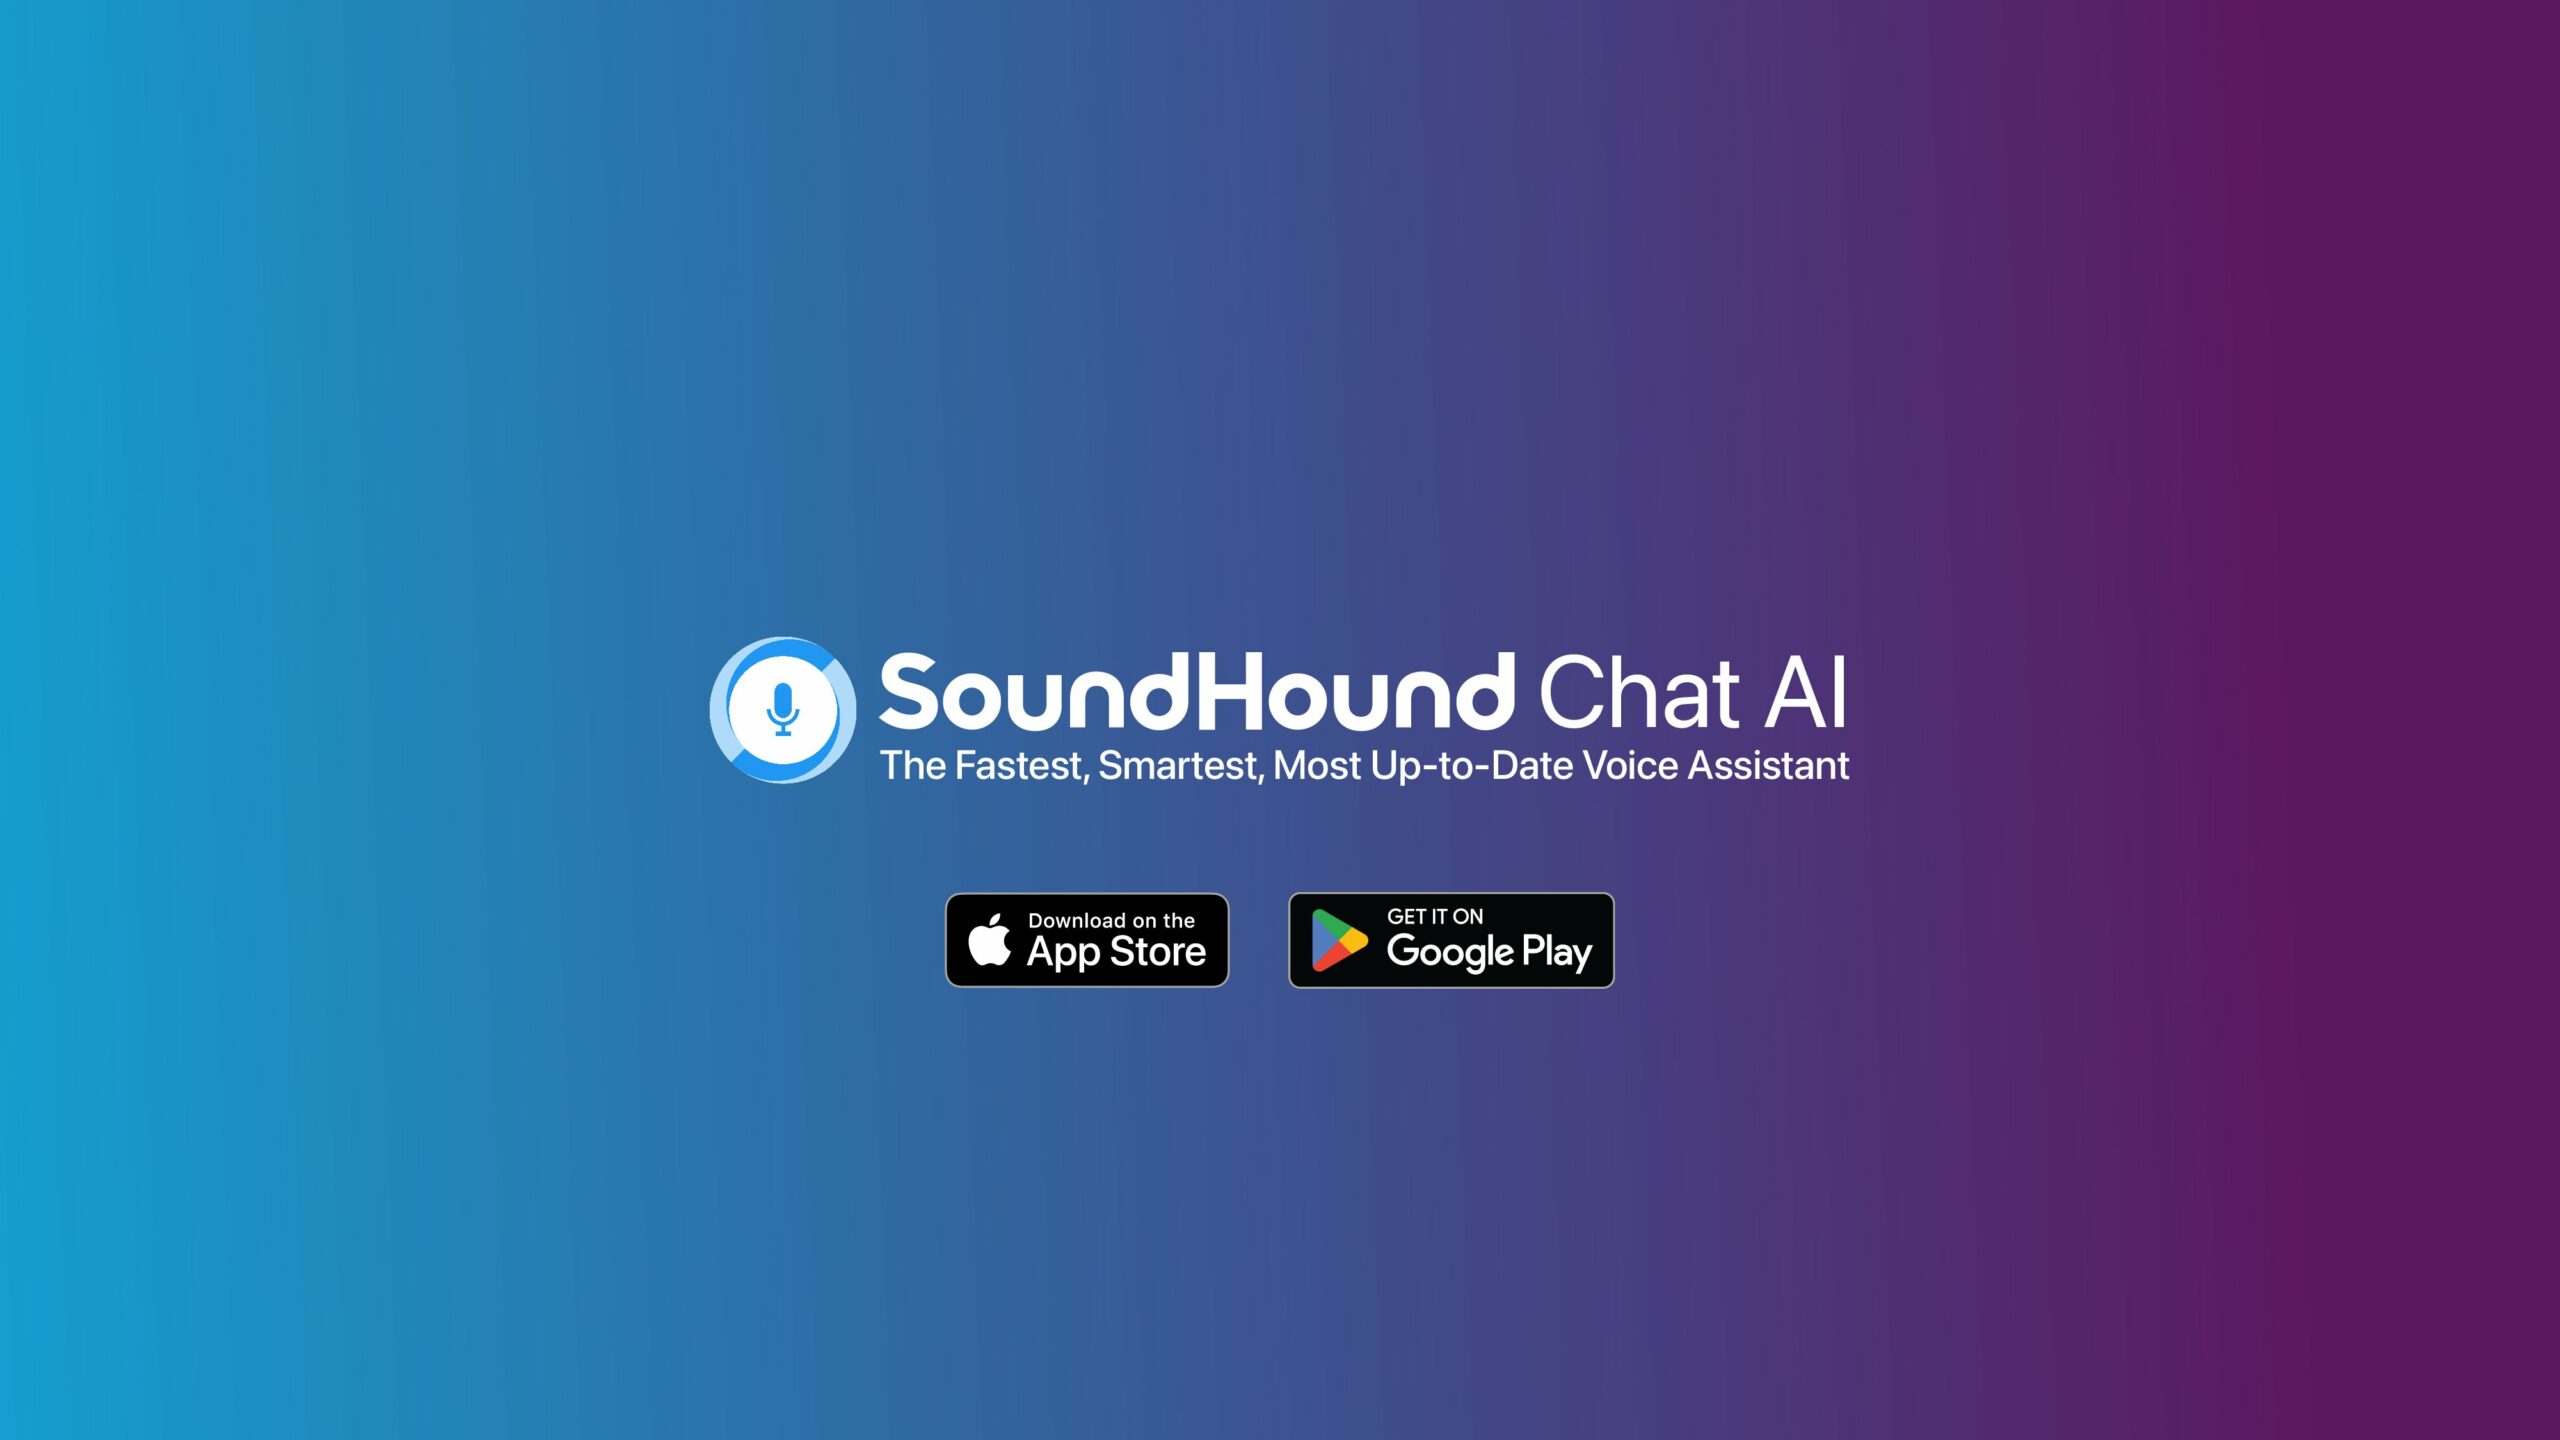 SoundHound Launched Chat AI Voice Assistant: Unlock The Power Of AI, Know Everything